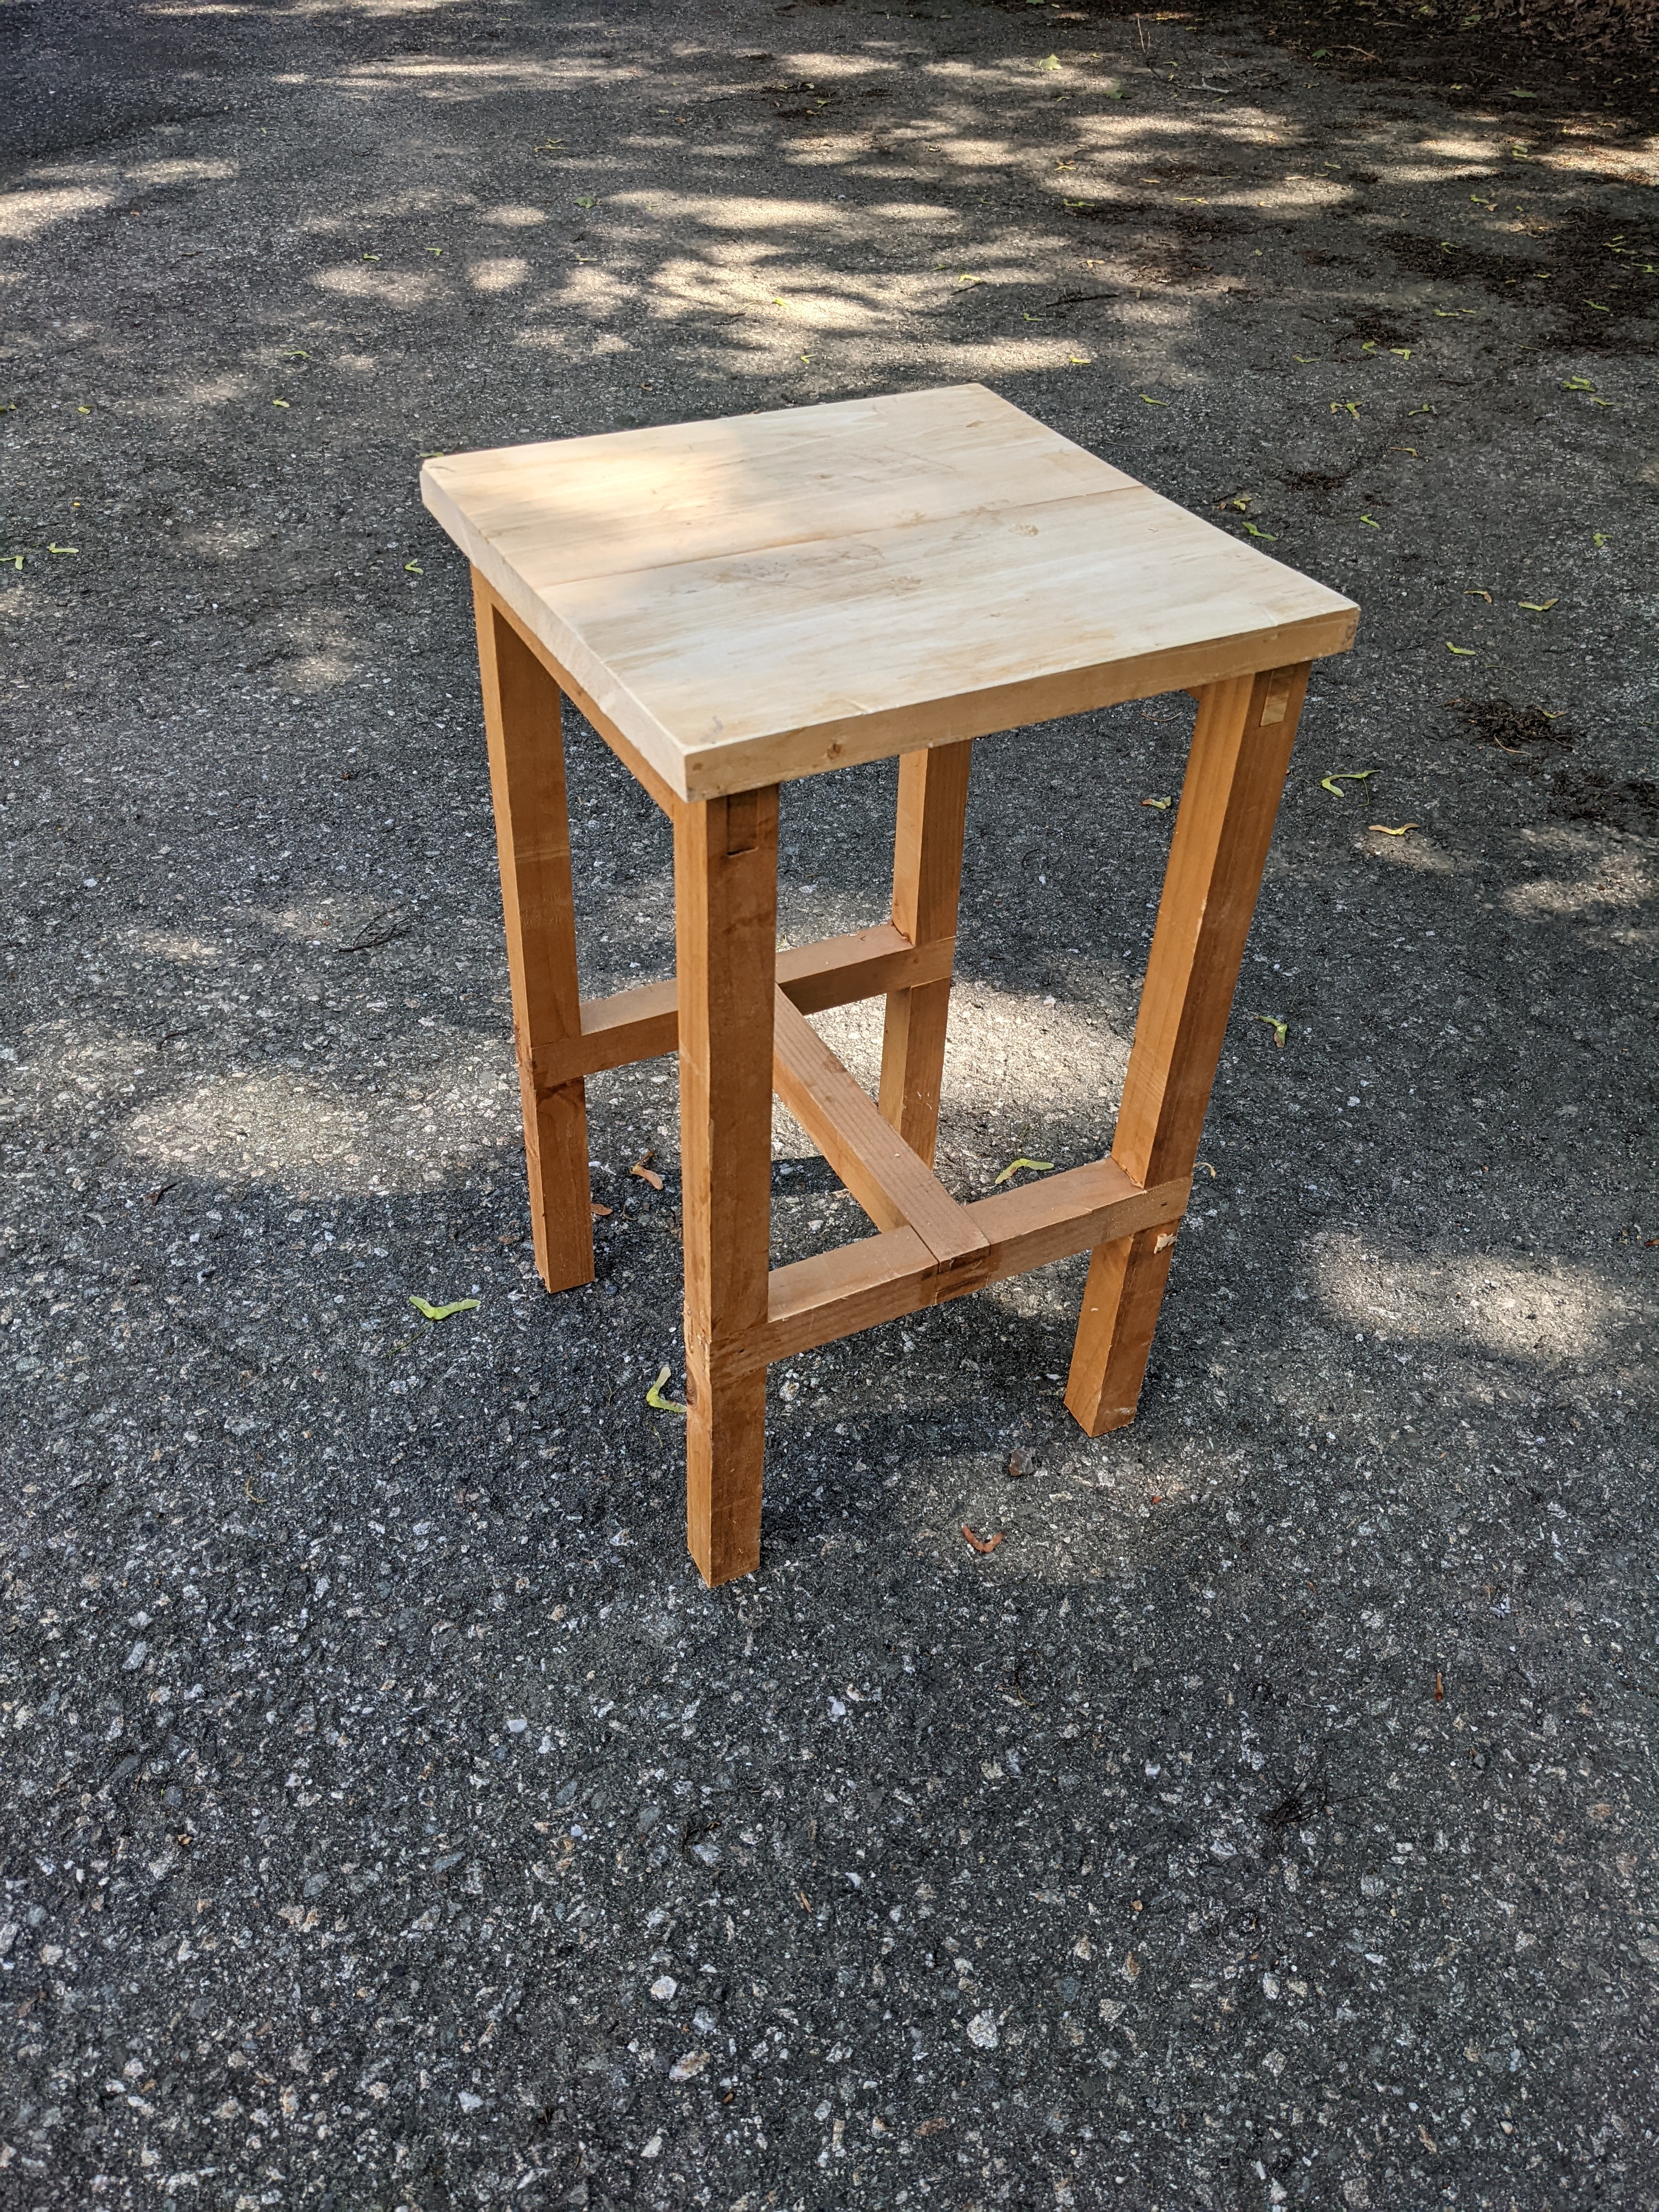 2022 06 old stool